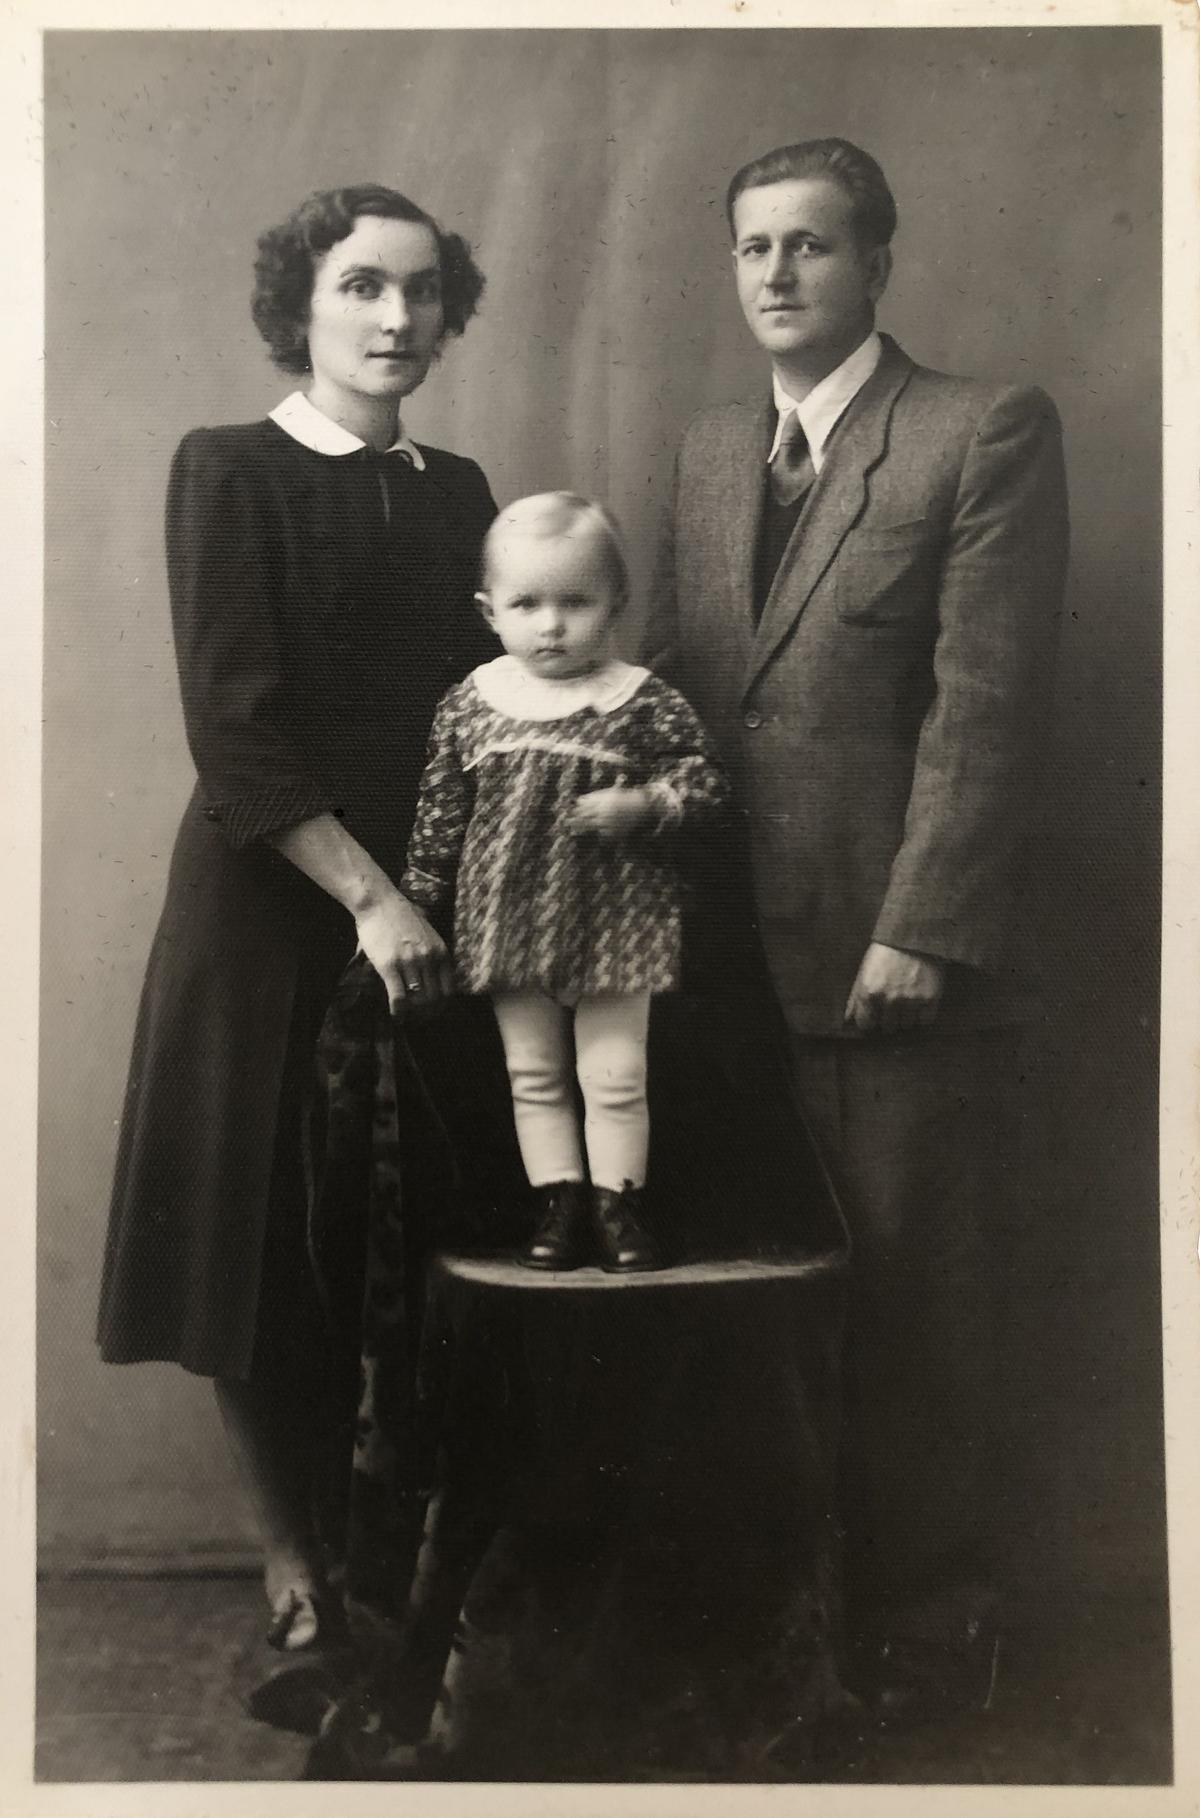 Barbara Schafer as a child with her parents in Poland. (Courtesy of Barbara Schafer)